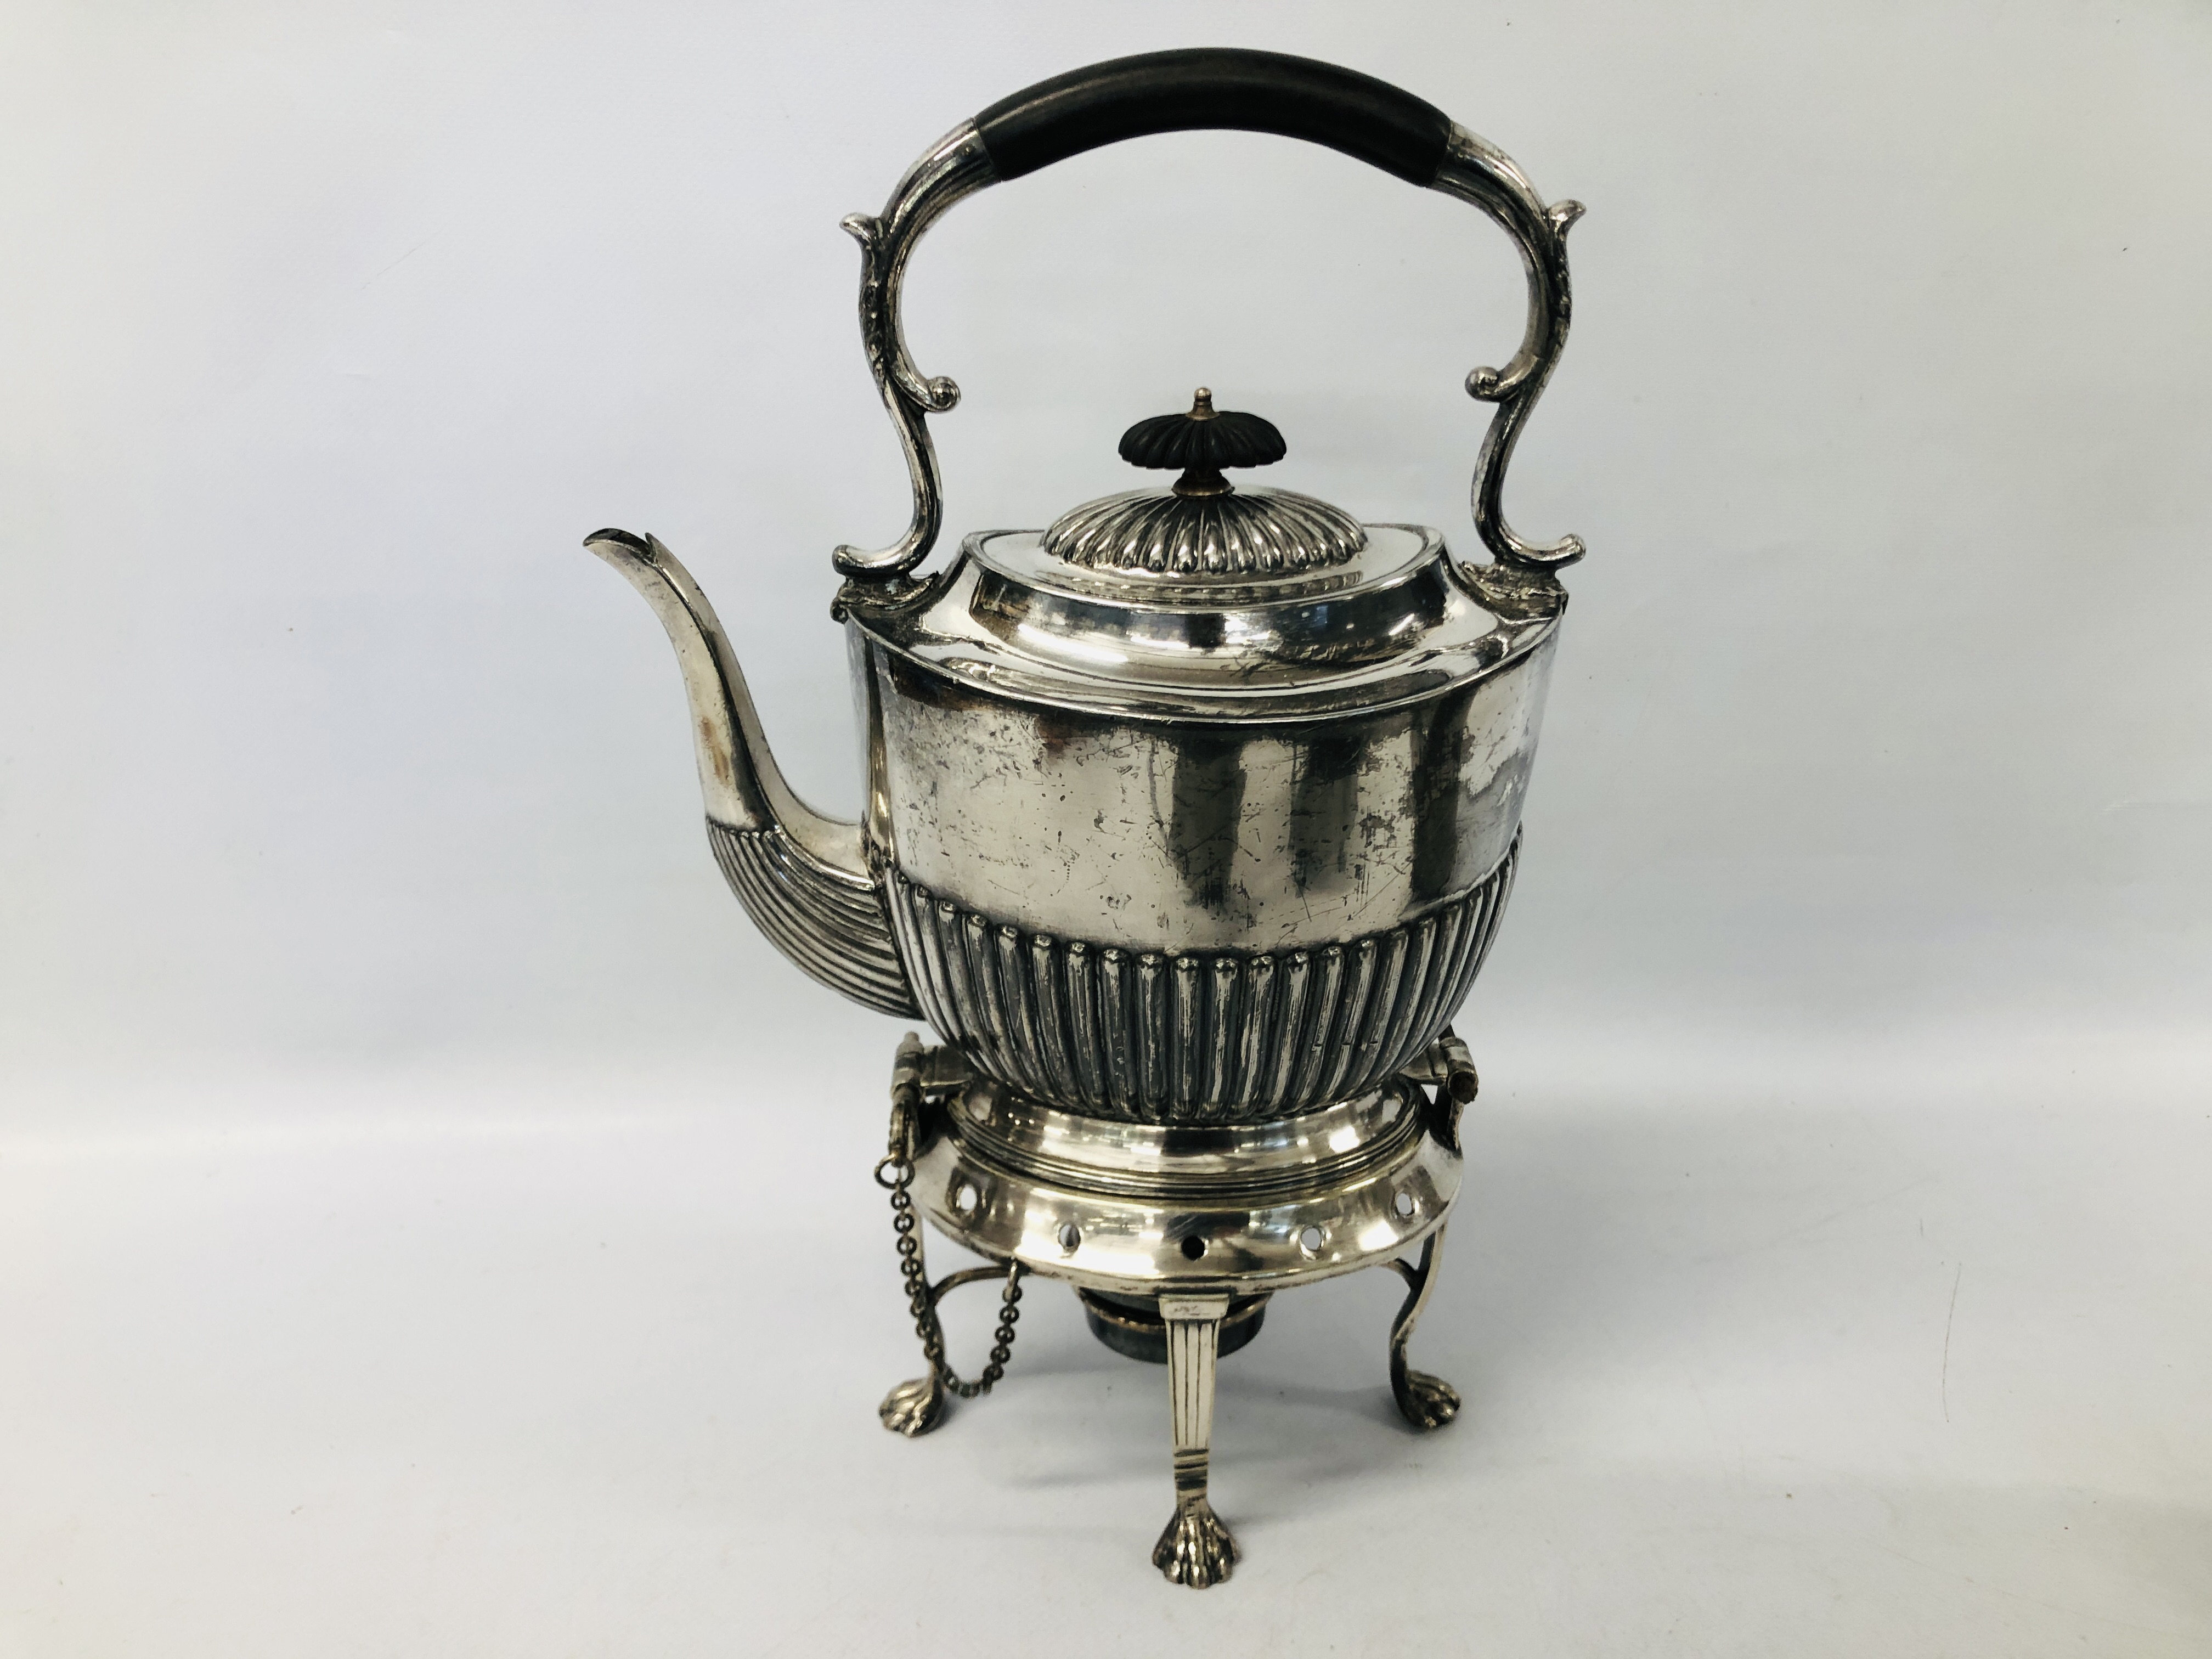 VINTAGE SILVER PLATED SPIRIT KETTLE ALONG WITH A VINTAGE 3 PIECE ARTS AND CRAFTS DON PEWTER TEASET - Image 5 of 6